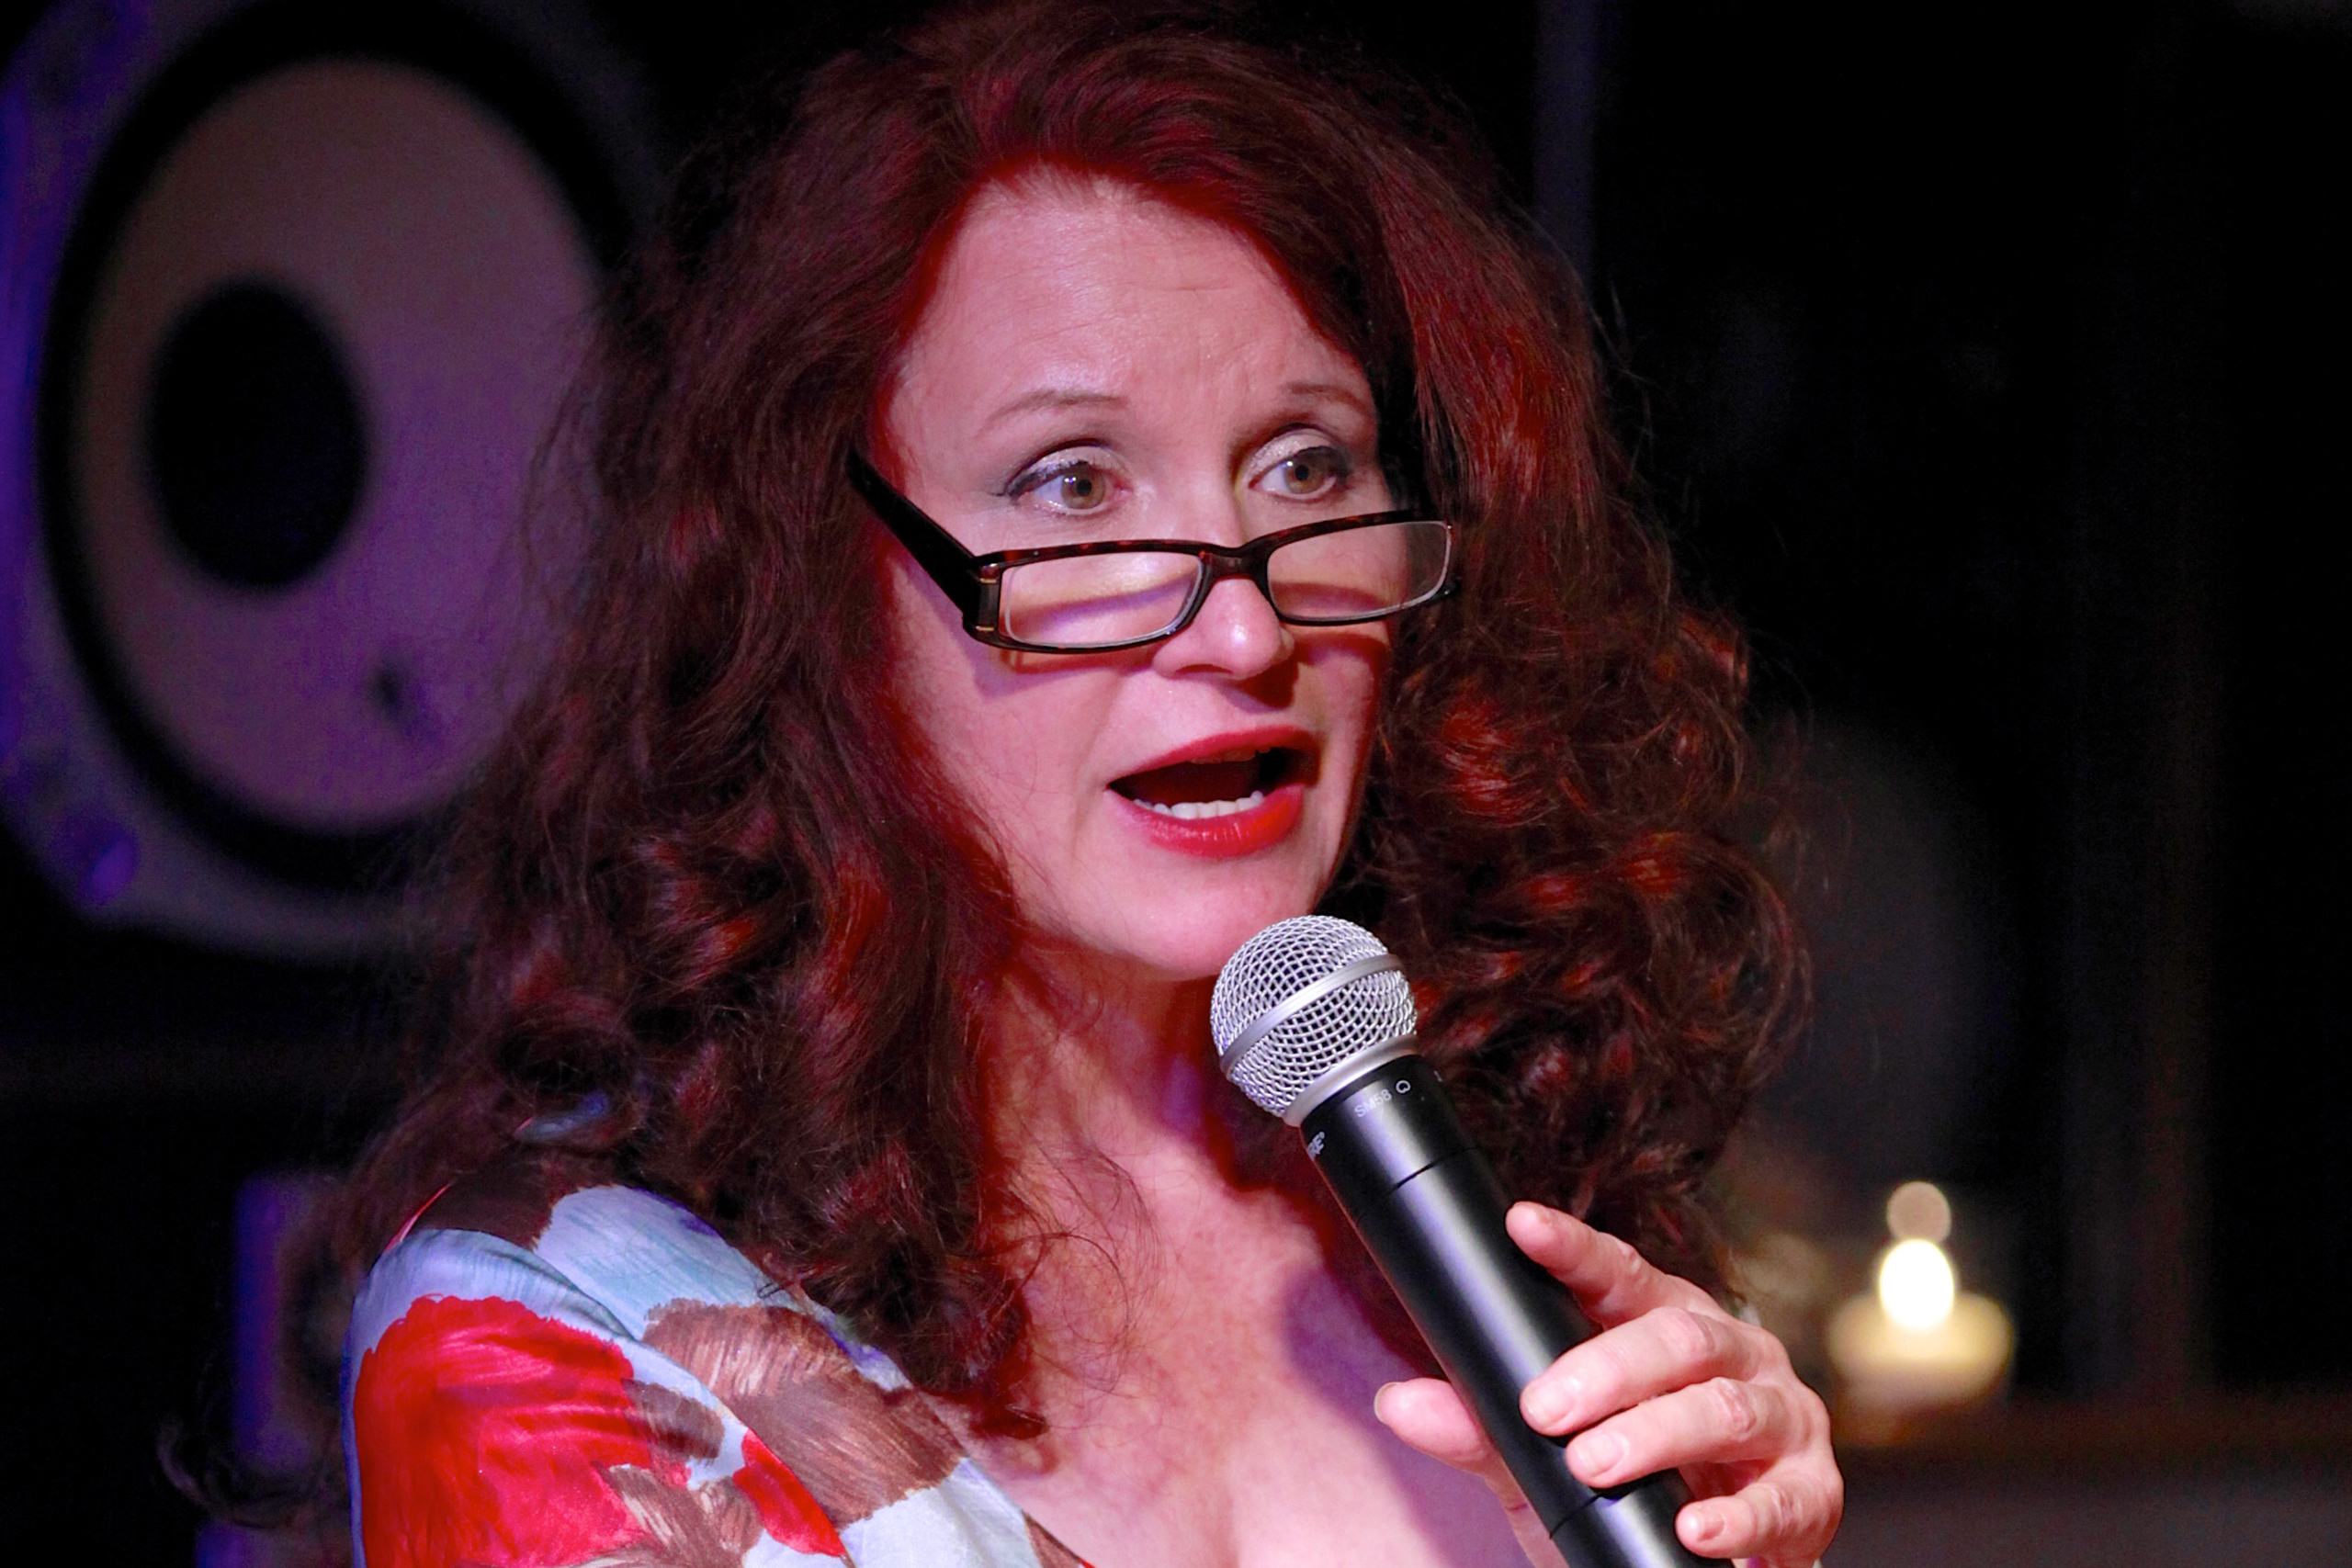 Finley reads at the Free Pussy Riot Public Reading on August 16, 2012 in New York City. (Charles Eshelman—Getty Images)